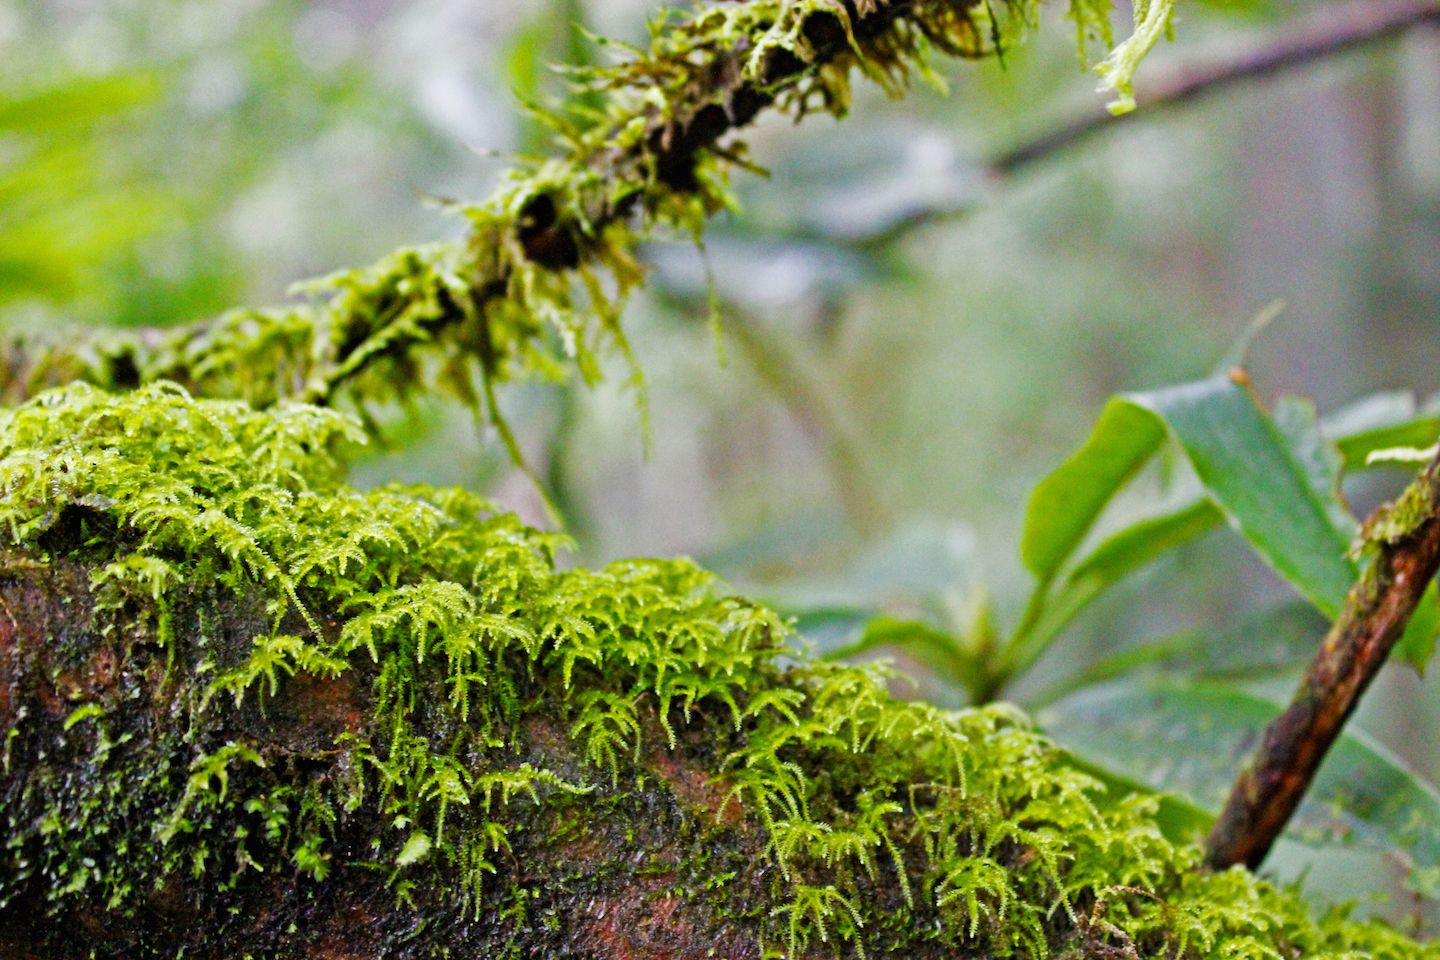 Moss growing on the tree branches